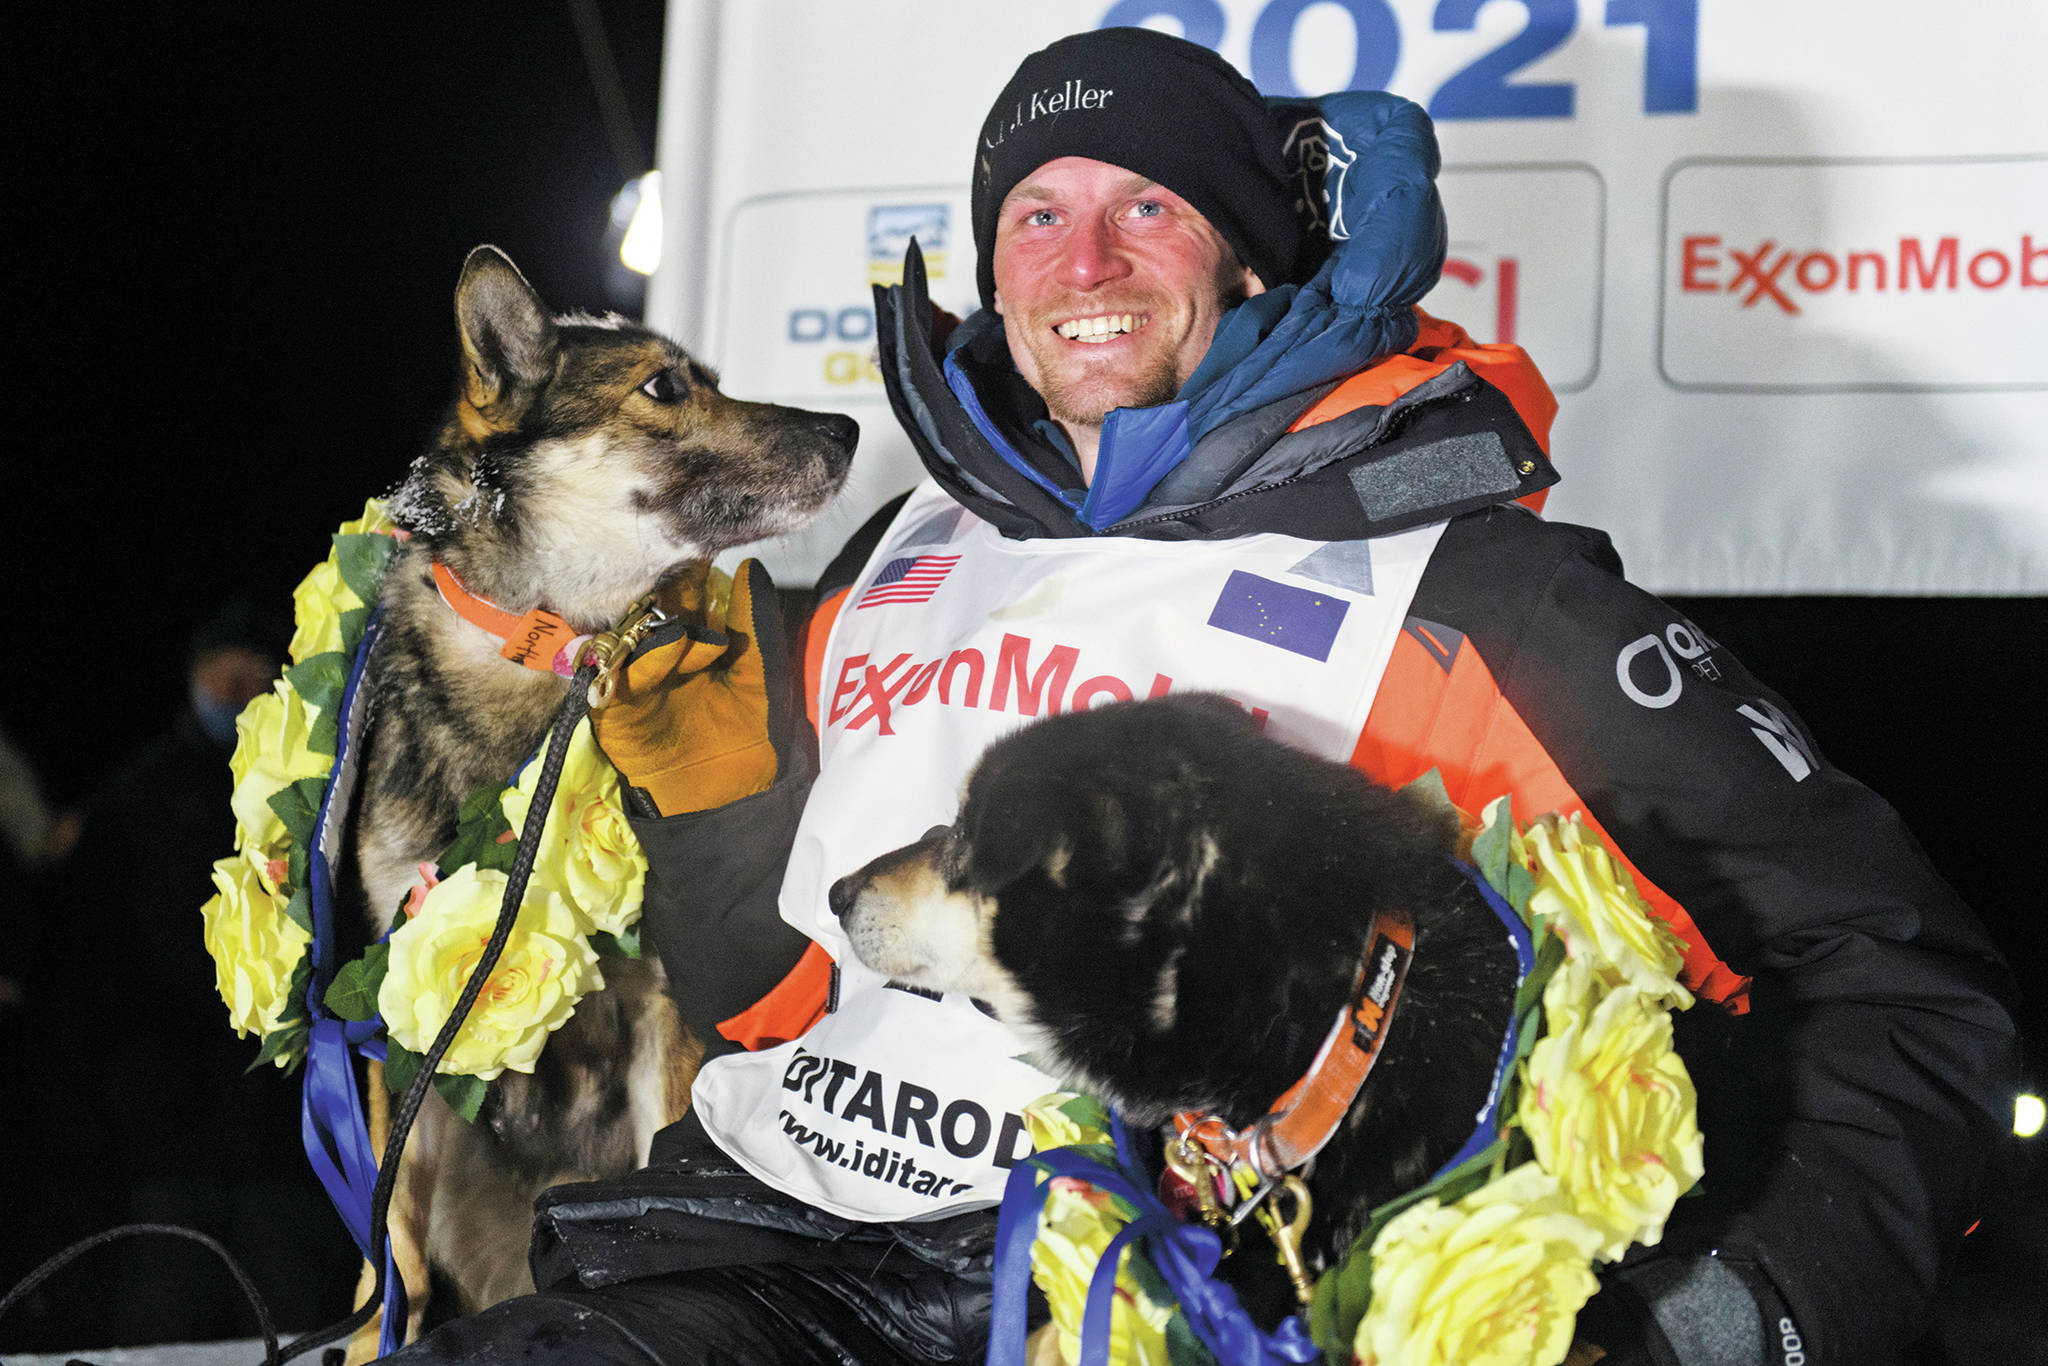 Dallas Seavey poses with his dogs after winning the Iditarod Trail Sled Dog Race race near Willow, Alaska, early Monday, March 15, 2021. (Marc Lester/Anchorage Daily News via AP)